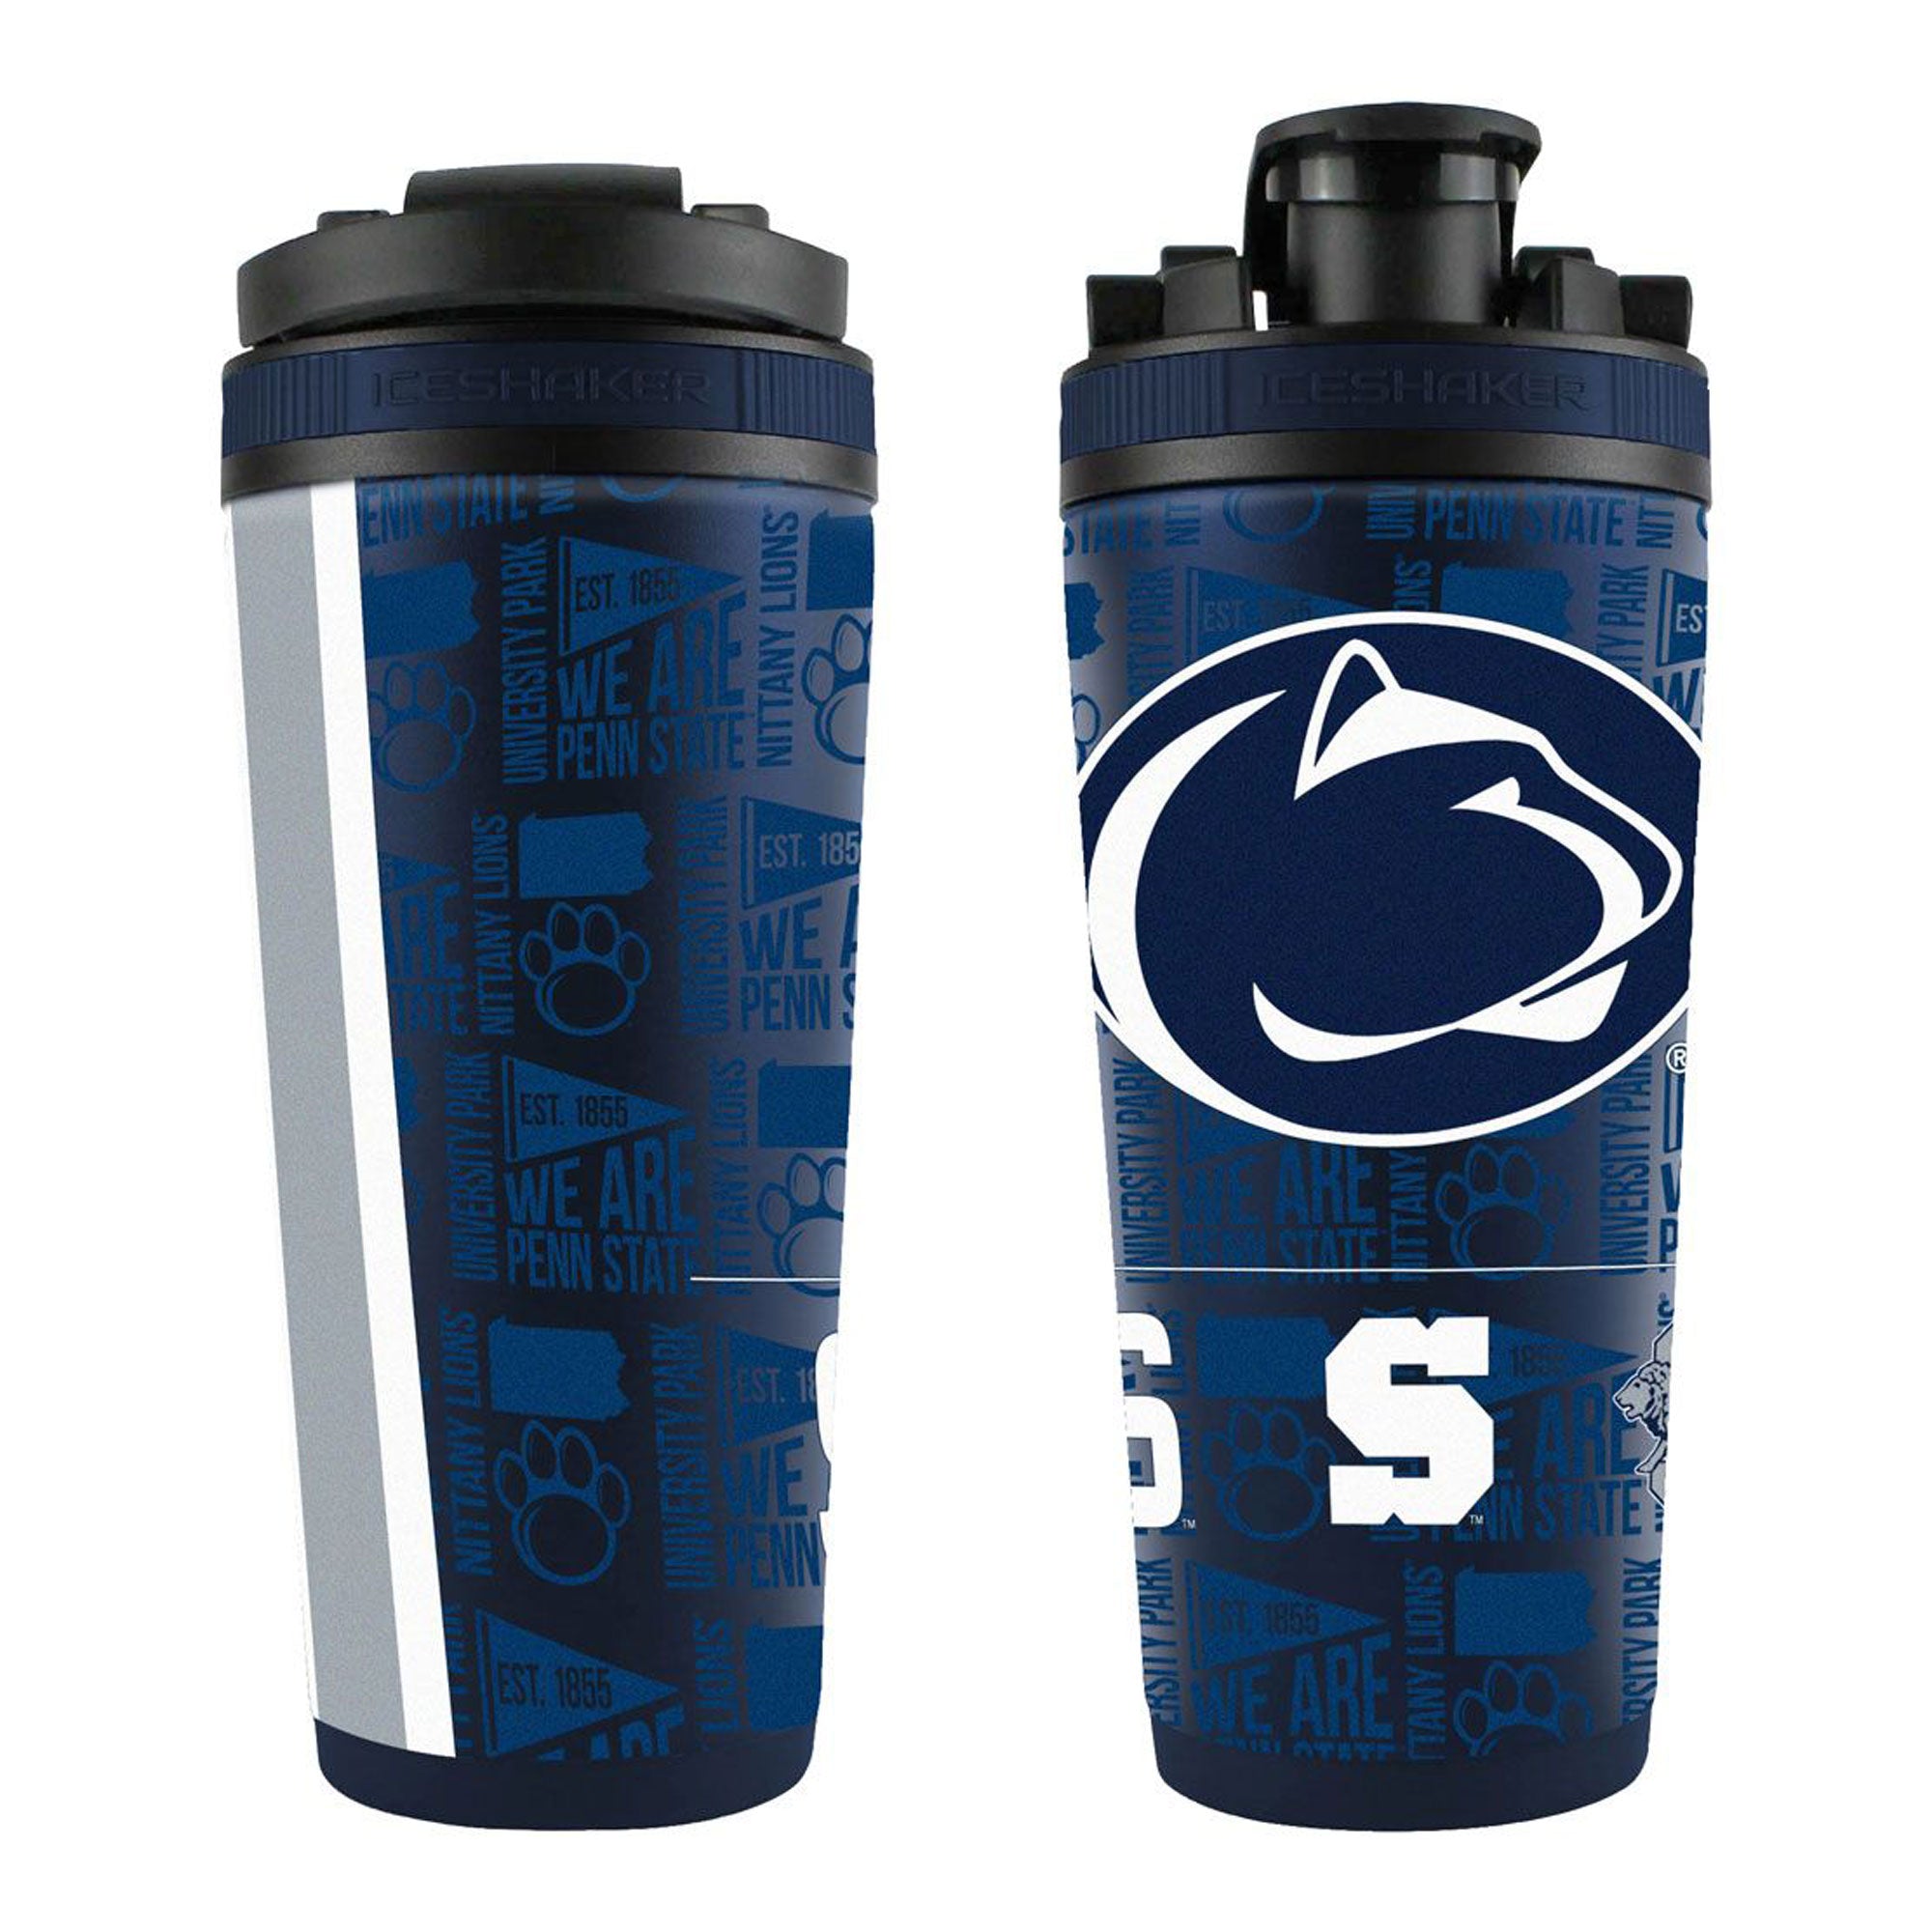 The College Vault - Penn State Nittany Lions 4D Ice Shaker